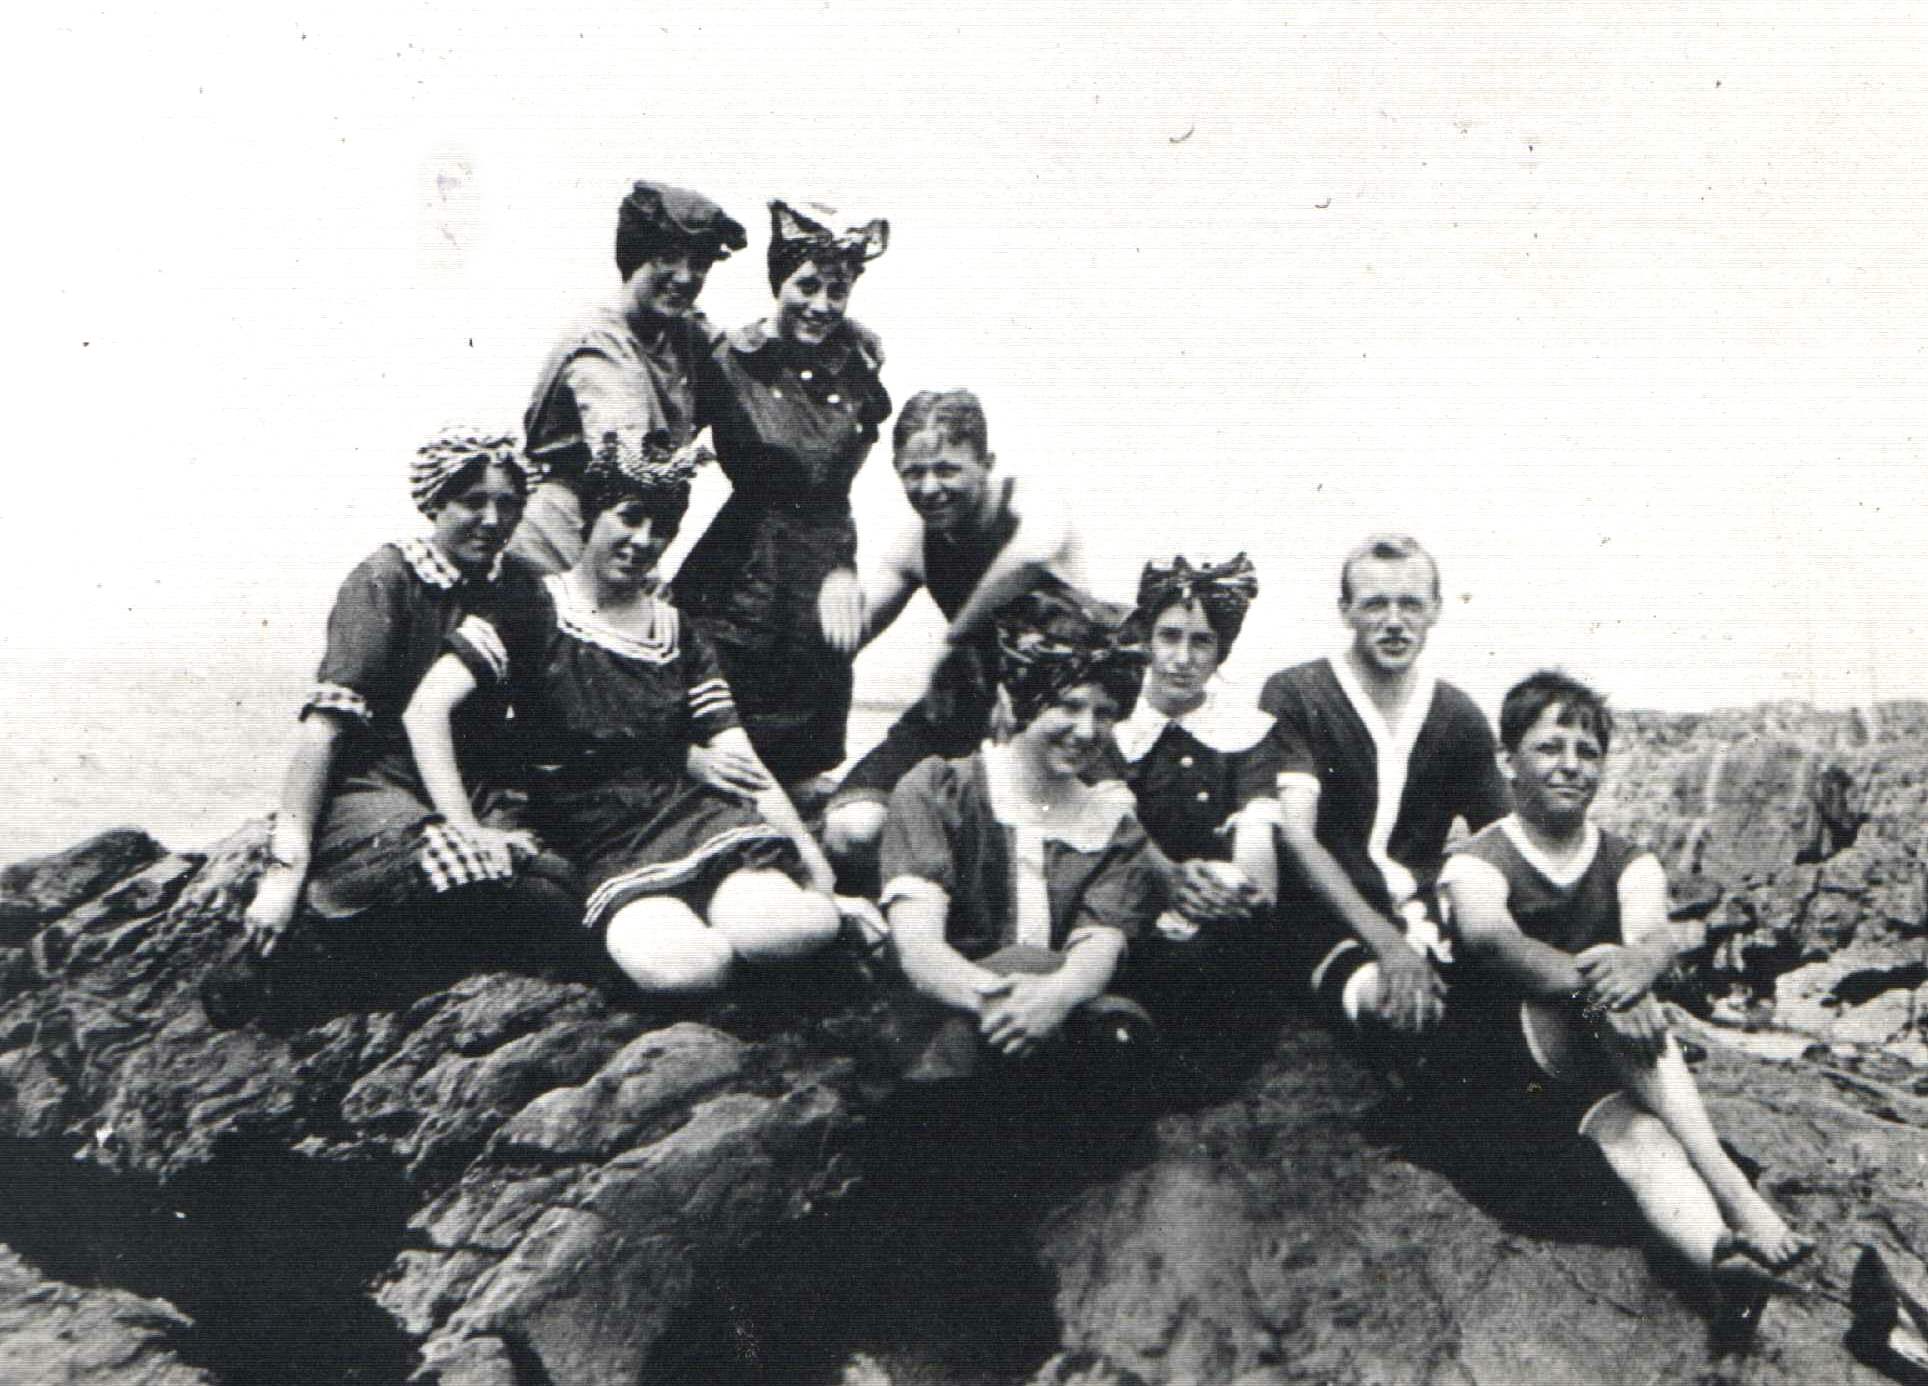 A photograph shows nine young people on a rock off the main shore of the St. Lawrence. They wear bathing suits that were stylish